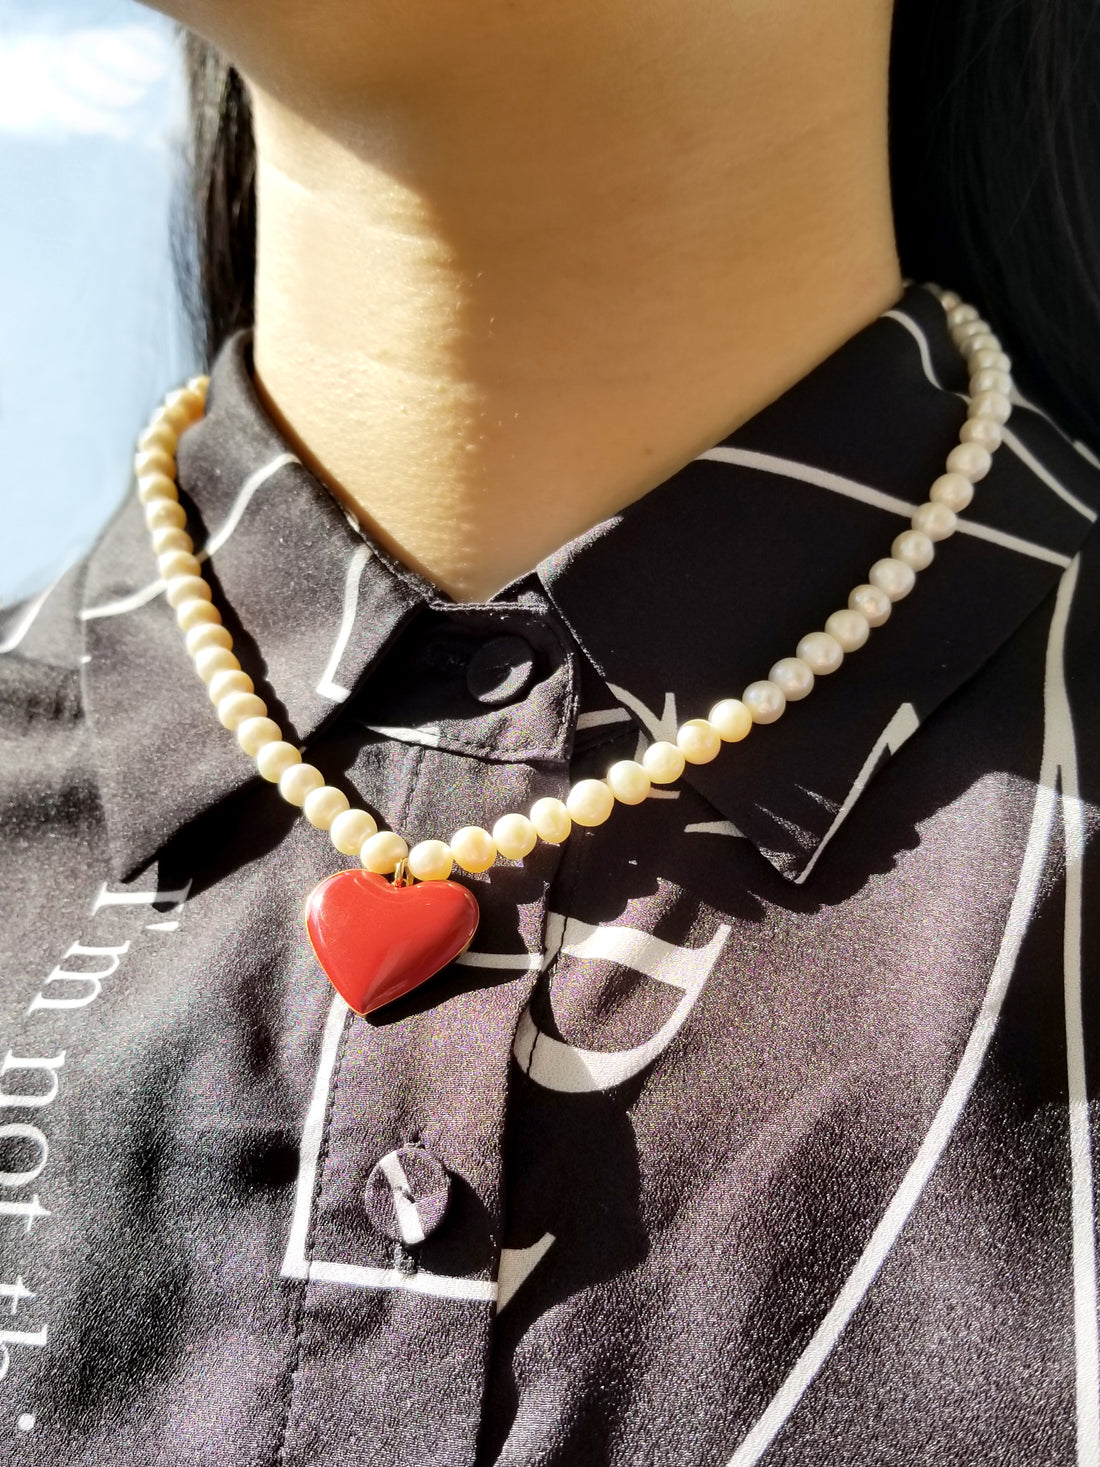 Love / Pearl Necklace •  Red / Black